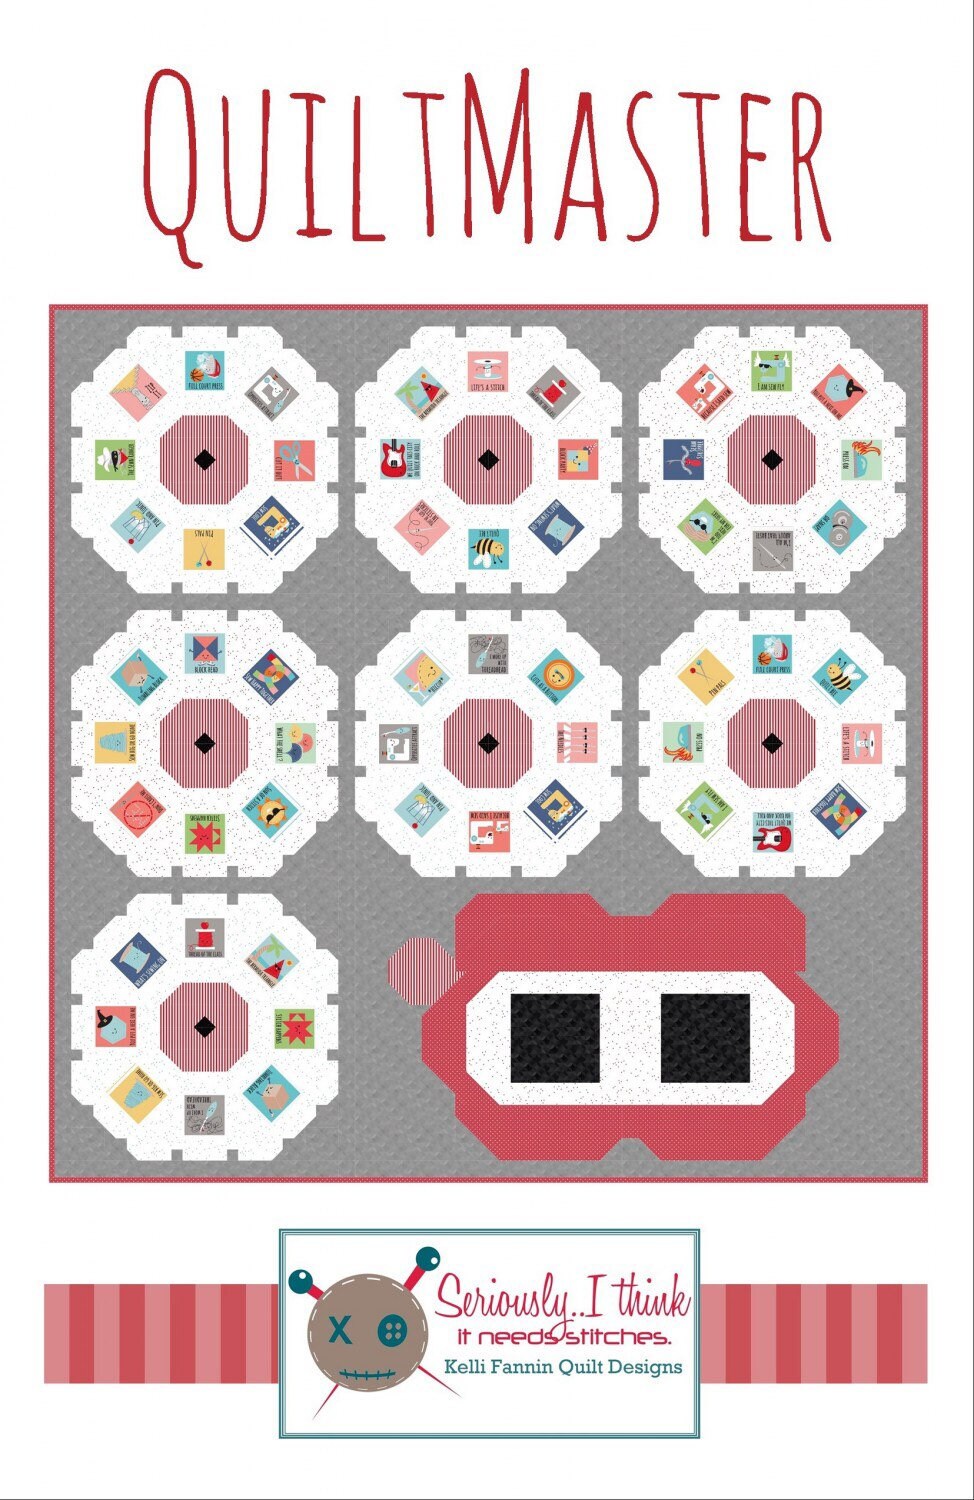 Quiltmaster Quilt Pattern - Kelli Fannin Quilt Designs - Great for Fussy Cutting - Viewmaster Quilt